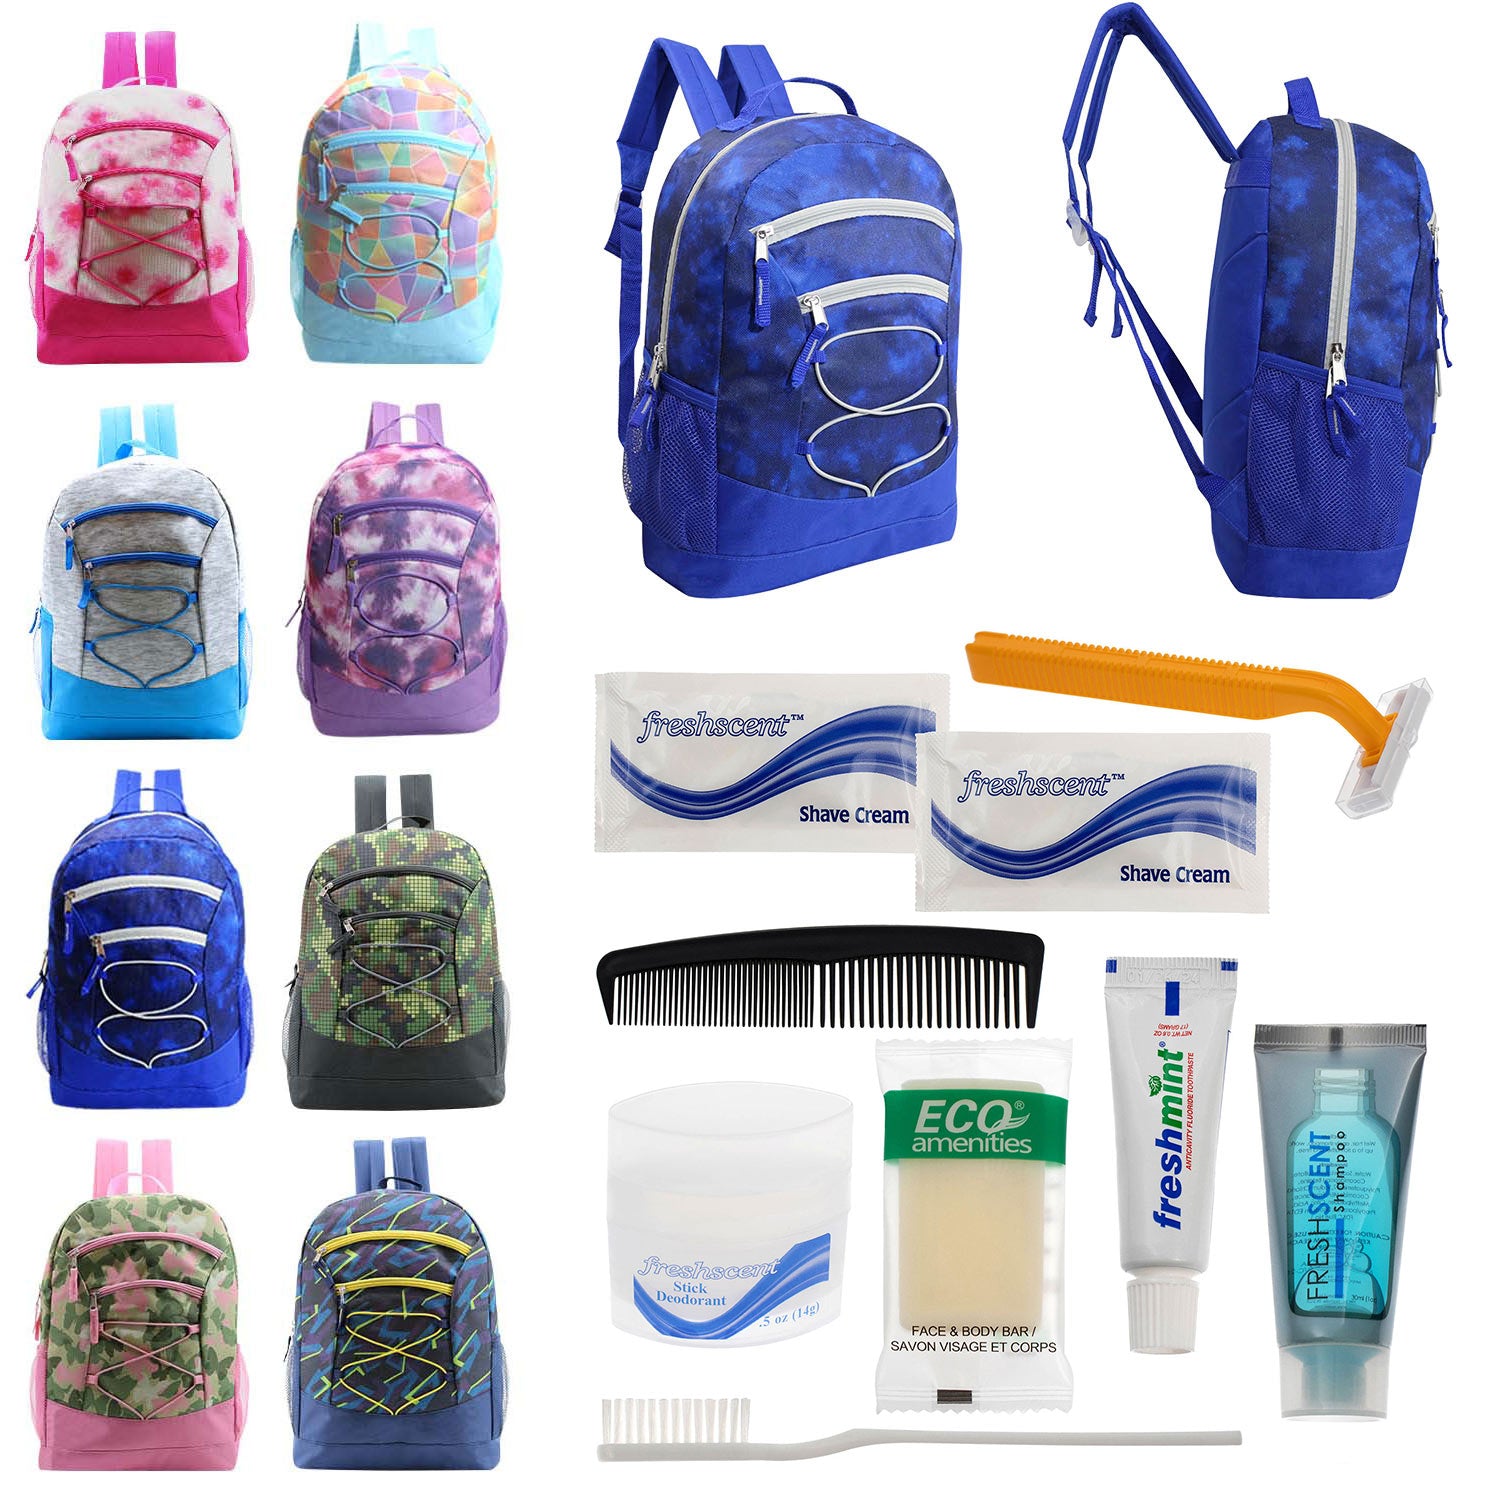 Bulk Case of 12 Backpacks and 12 Hygiene / Toiletries Kit - Wholesale Care Package - Disaster Relief Kit, Homeless, Charity